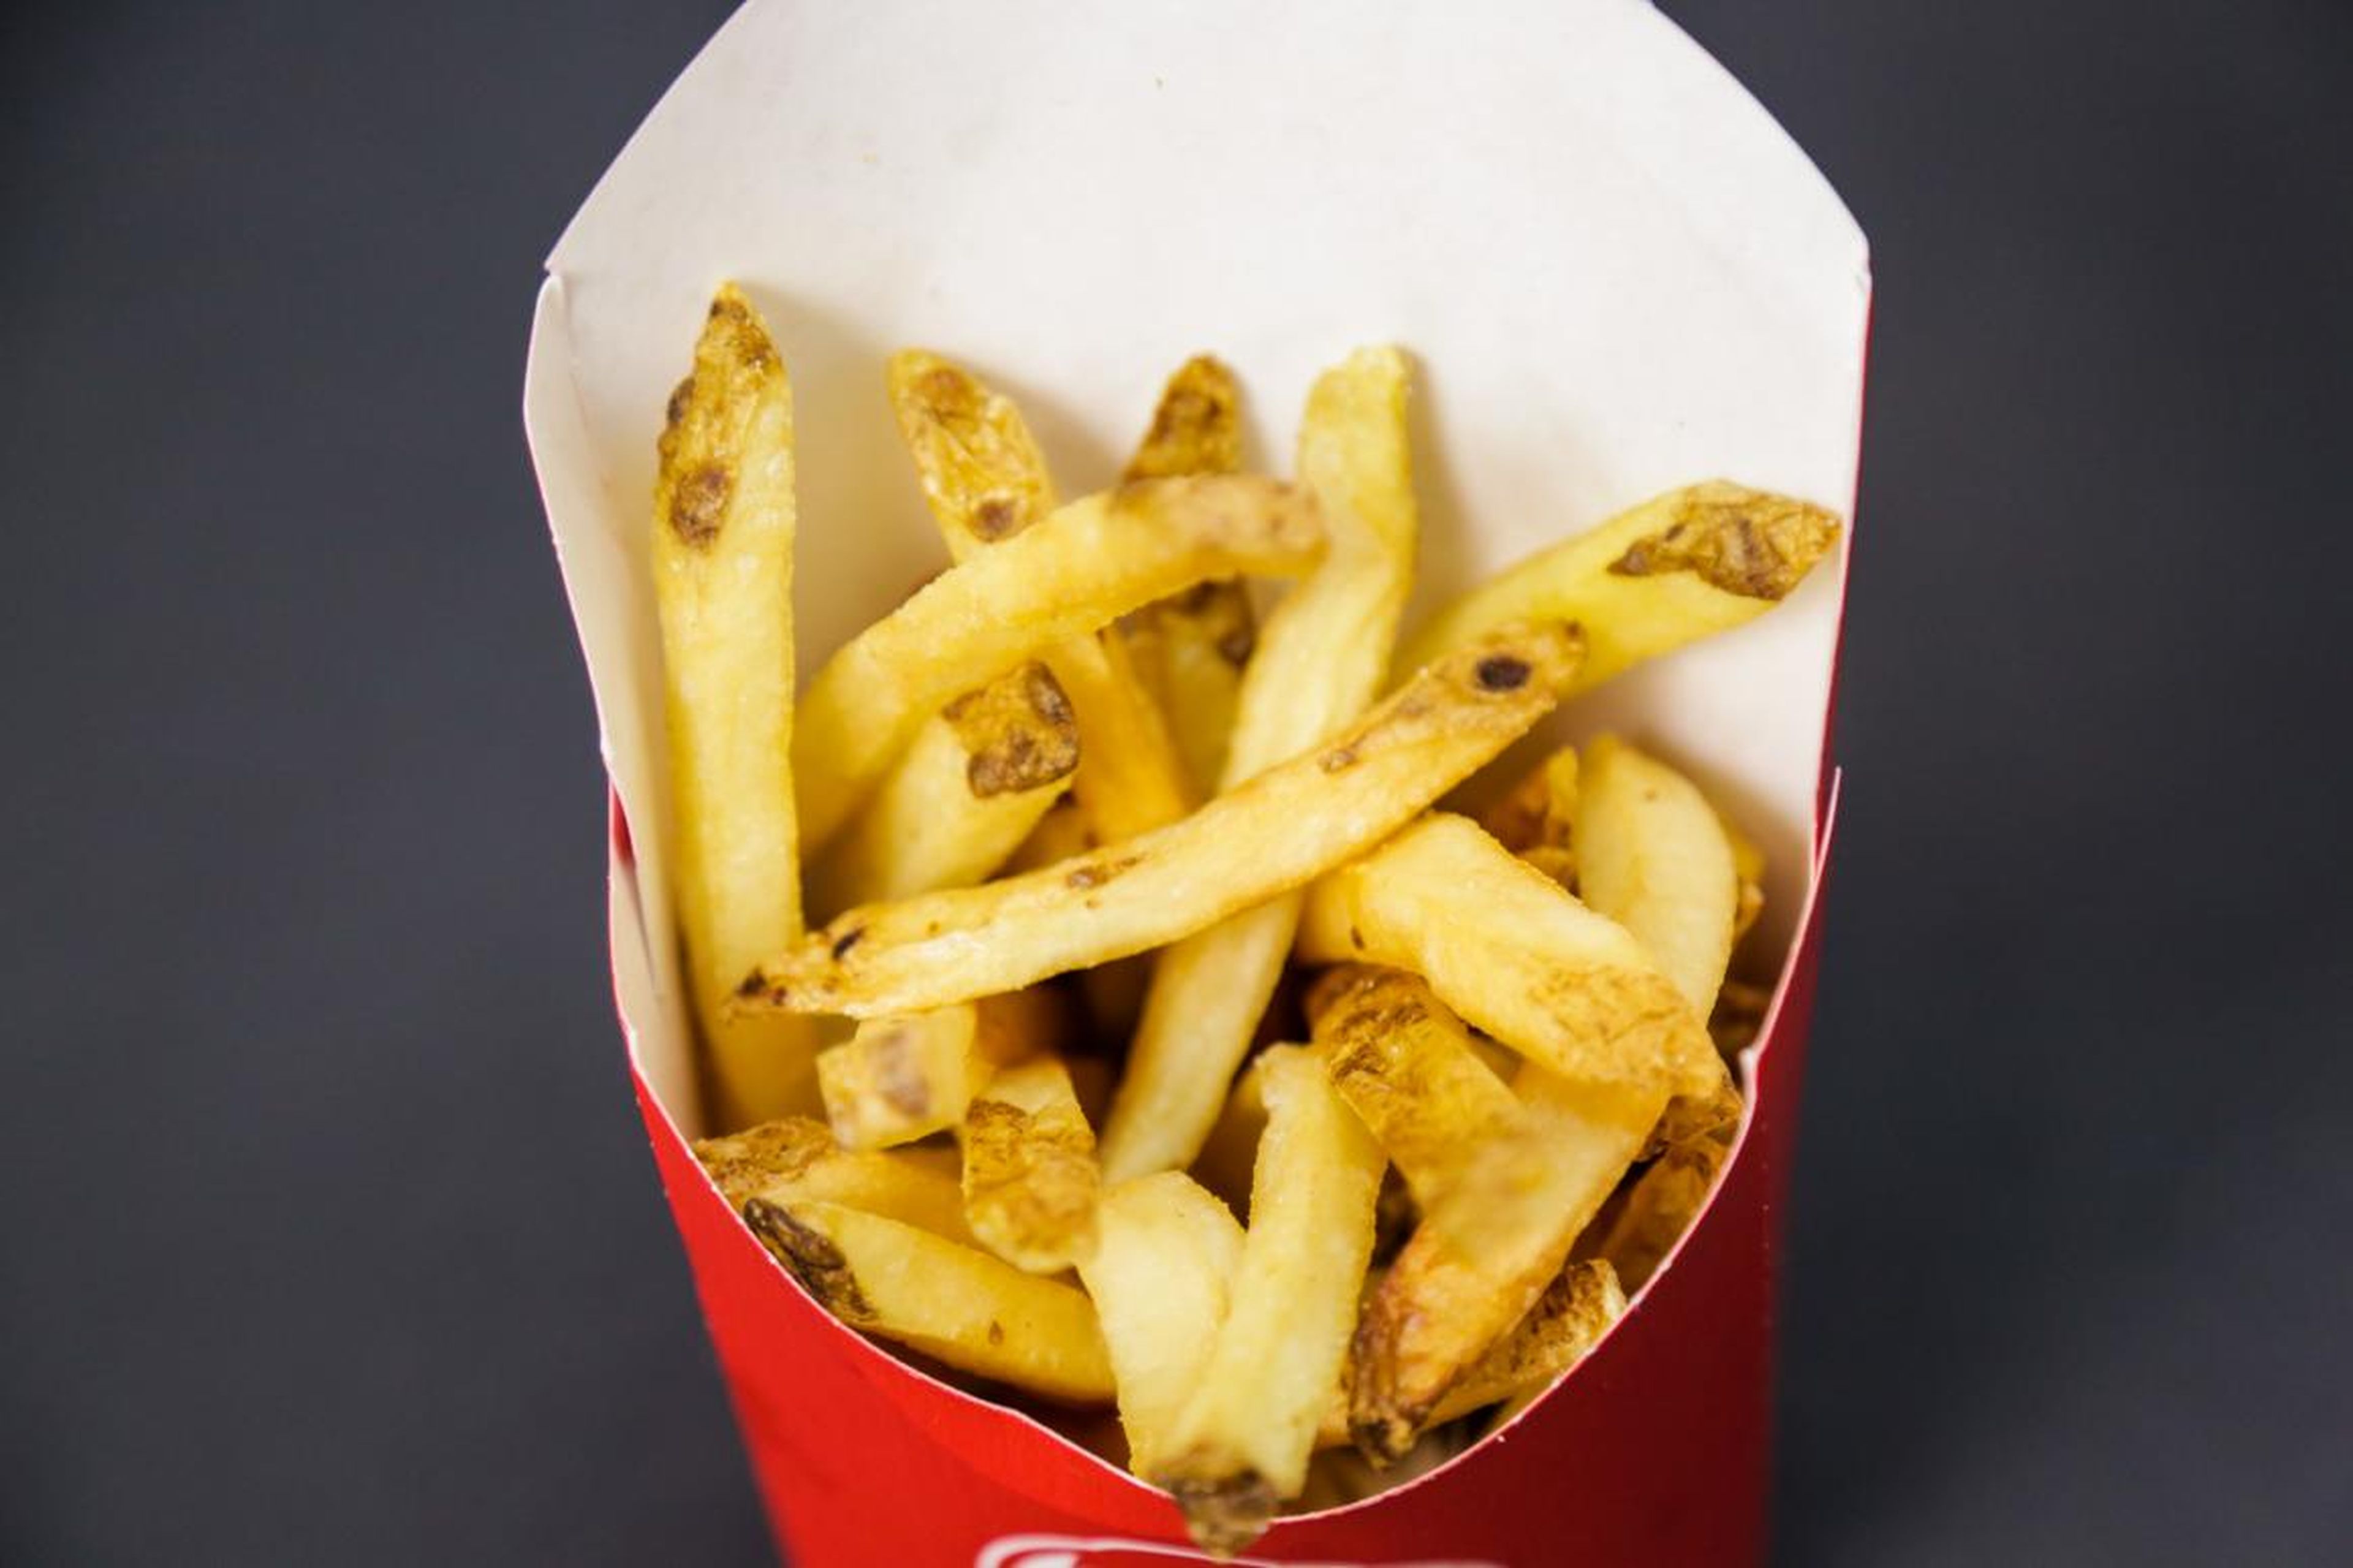 Sometimes crispy, sometimes not, these fries taste kind of like earthy, real potatoes, but they definitely have some metallic, processed undertones. They're kind of pungent, a little dry, with a texture like mashed potatoes. And